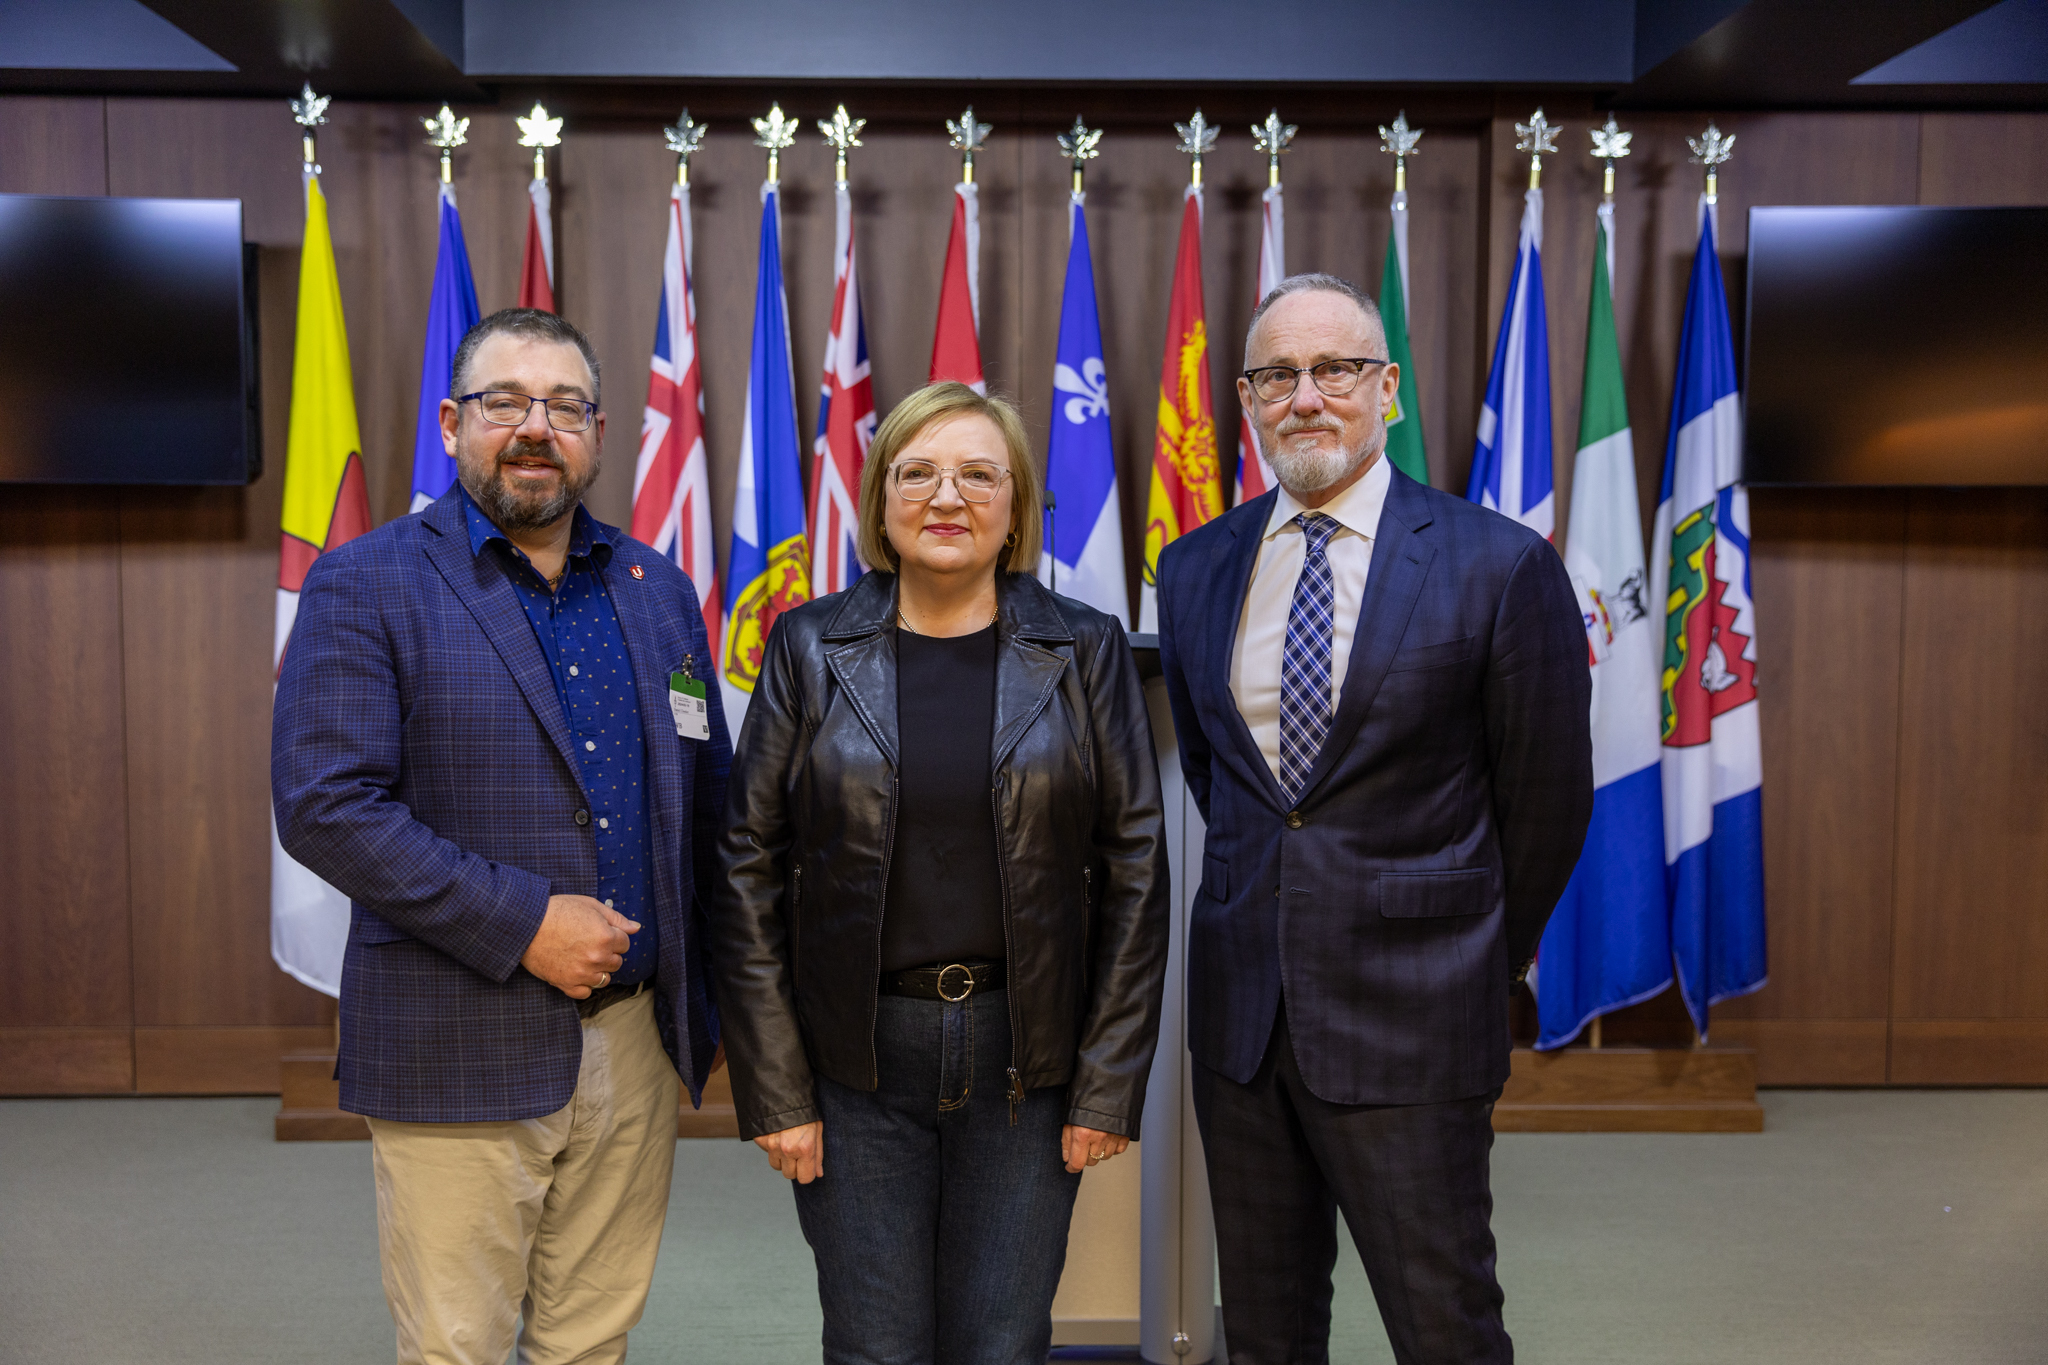 Three people standing in front of a row of provincial flags